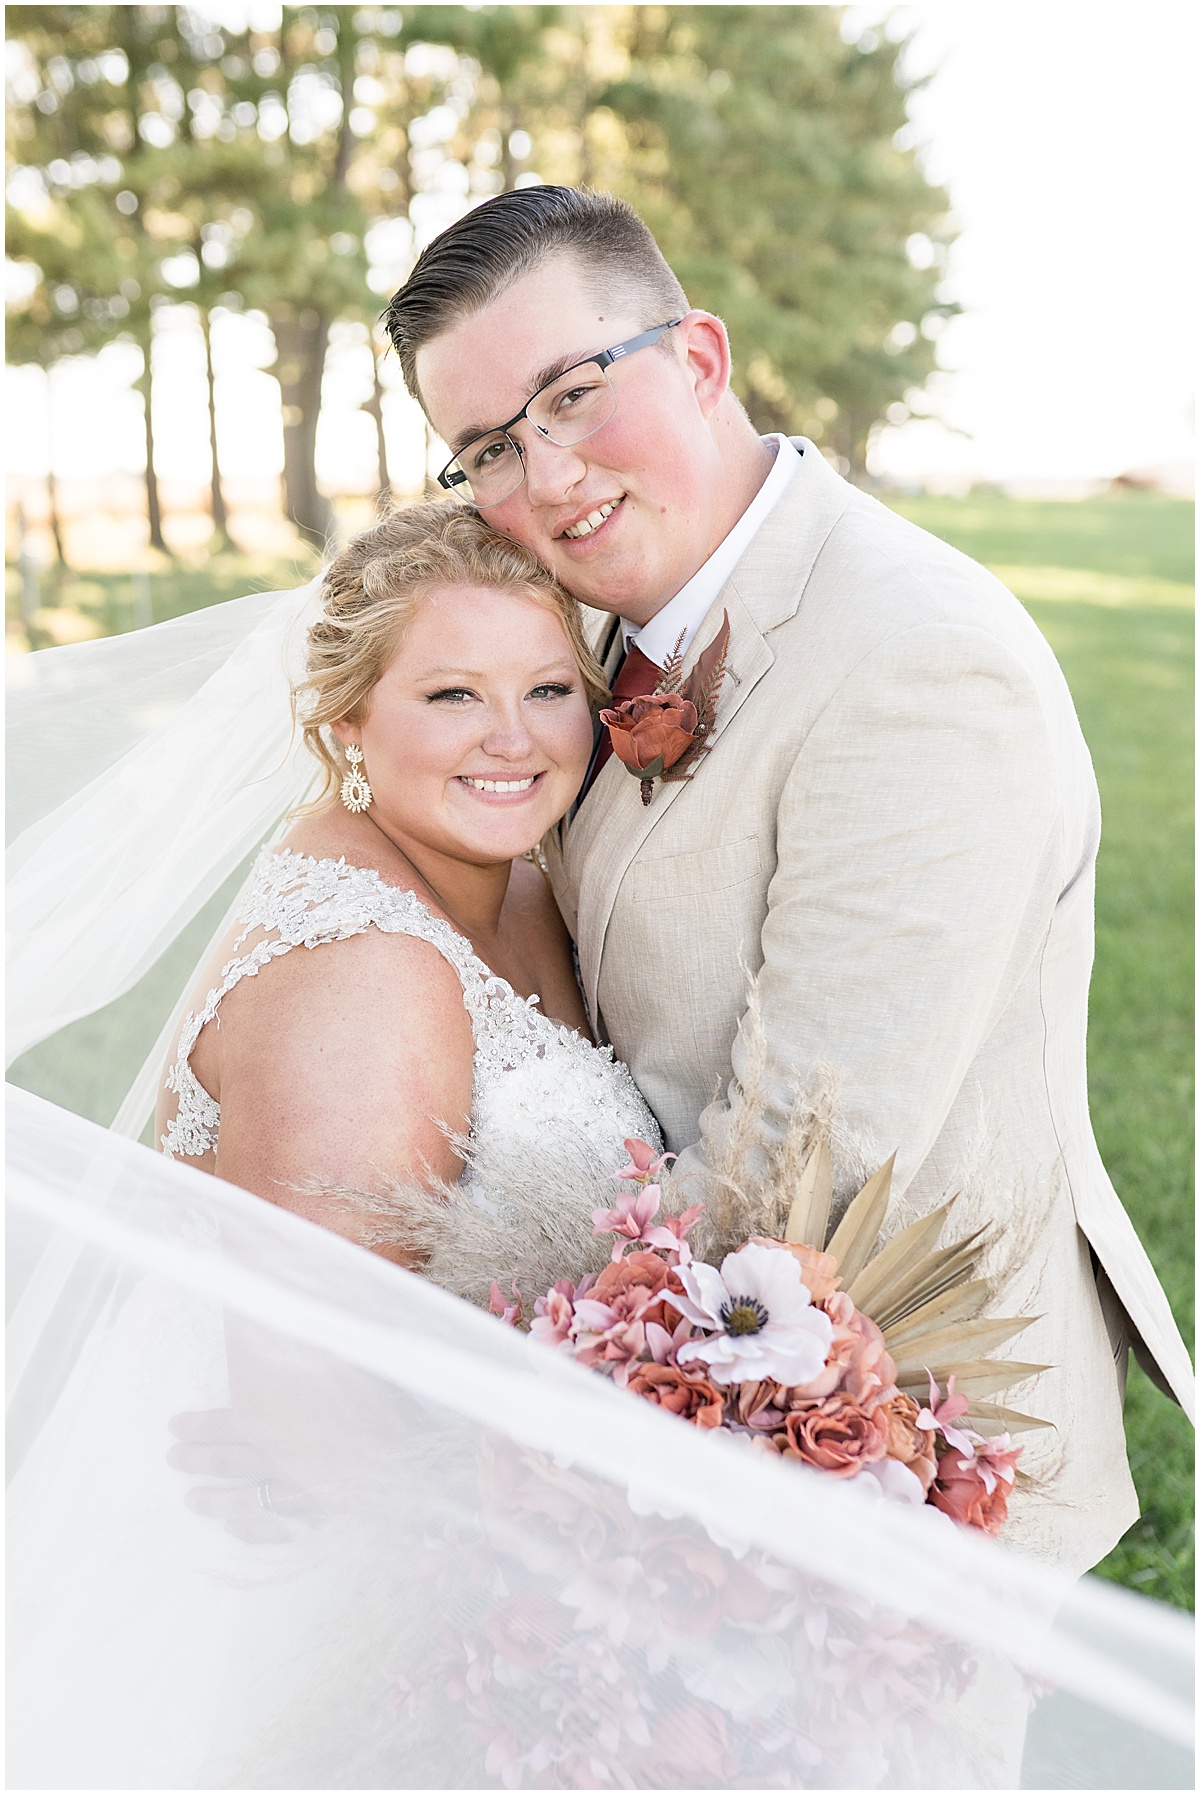 Bride and groom just married photos at Miami County Fairgrounds wedding in Peru, Indiana